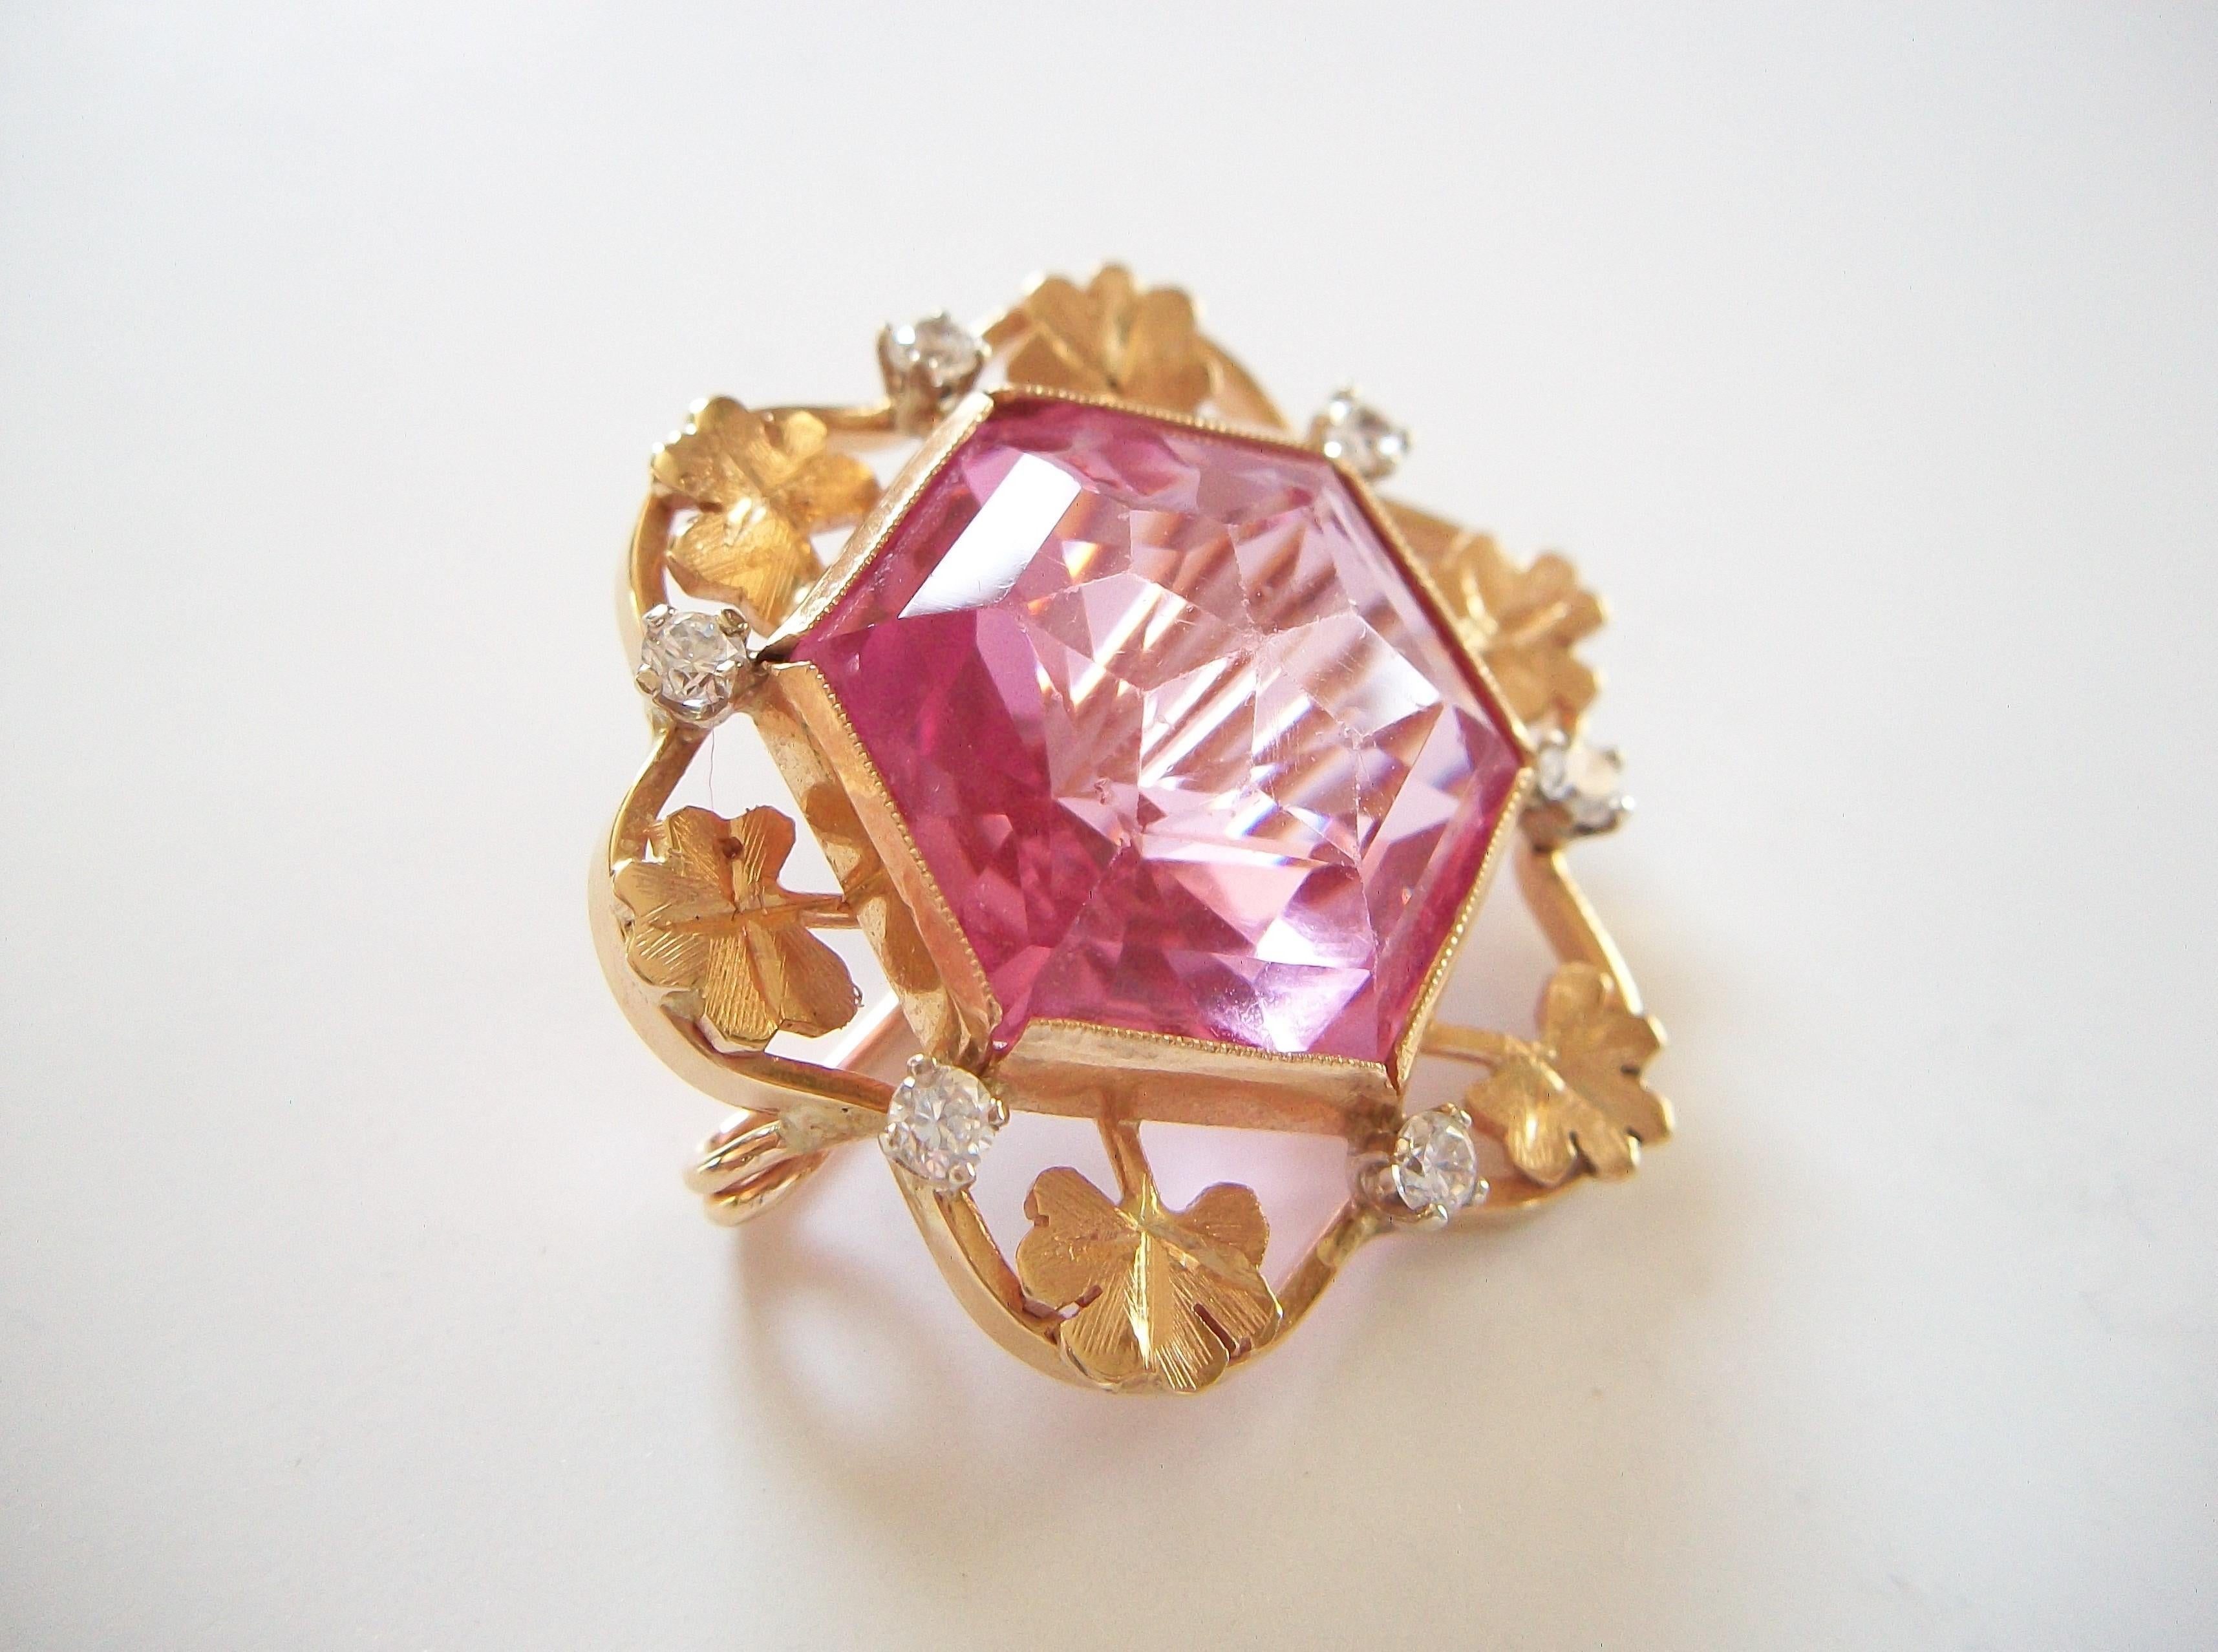 Hexagon Cut Retro Hexagon Pink & Clear Crystal Brooch - 14K Gold - Italy - Circa 1960's For Sale